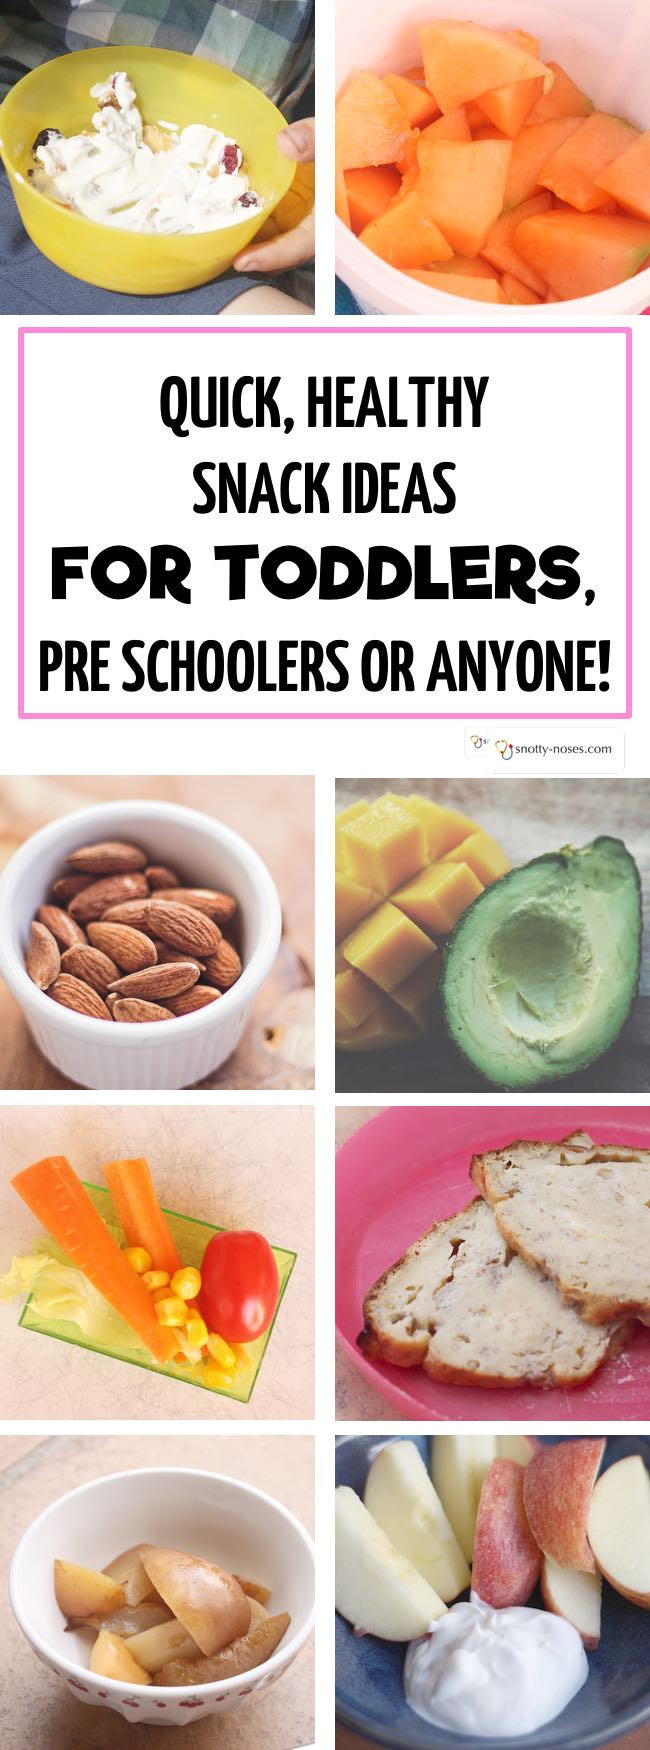 Quick Healthy Snacks For Kids
 Quick Healthy Snacks for Toddlers and Young Kids